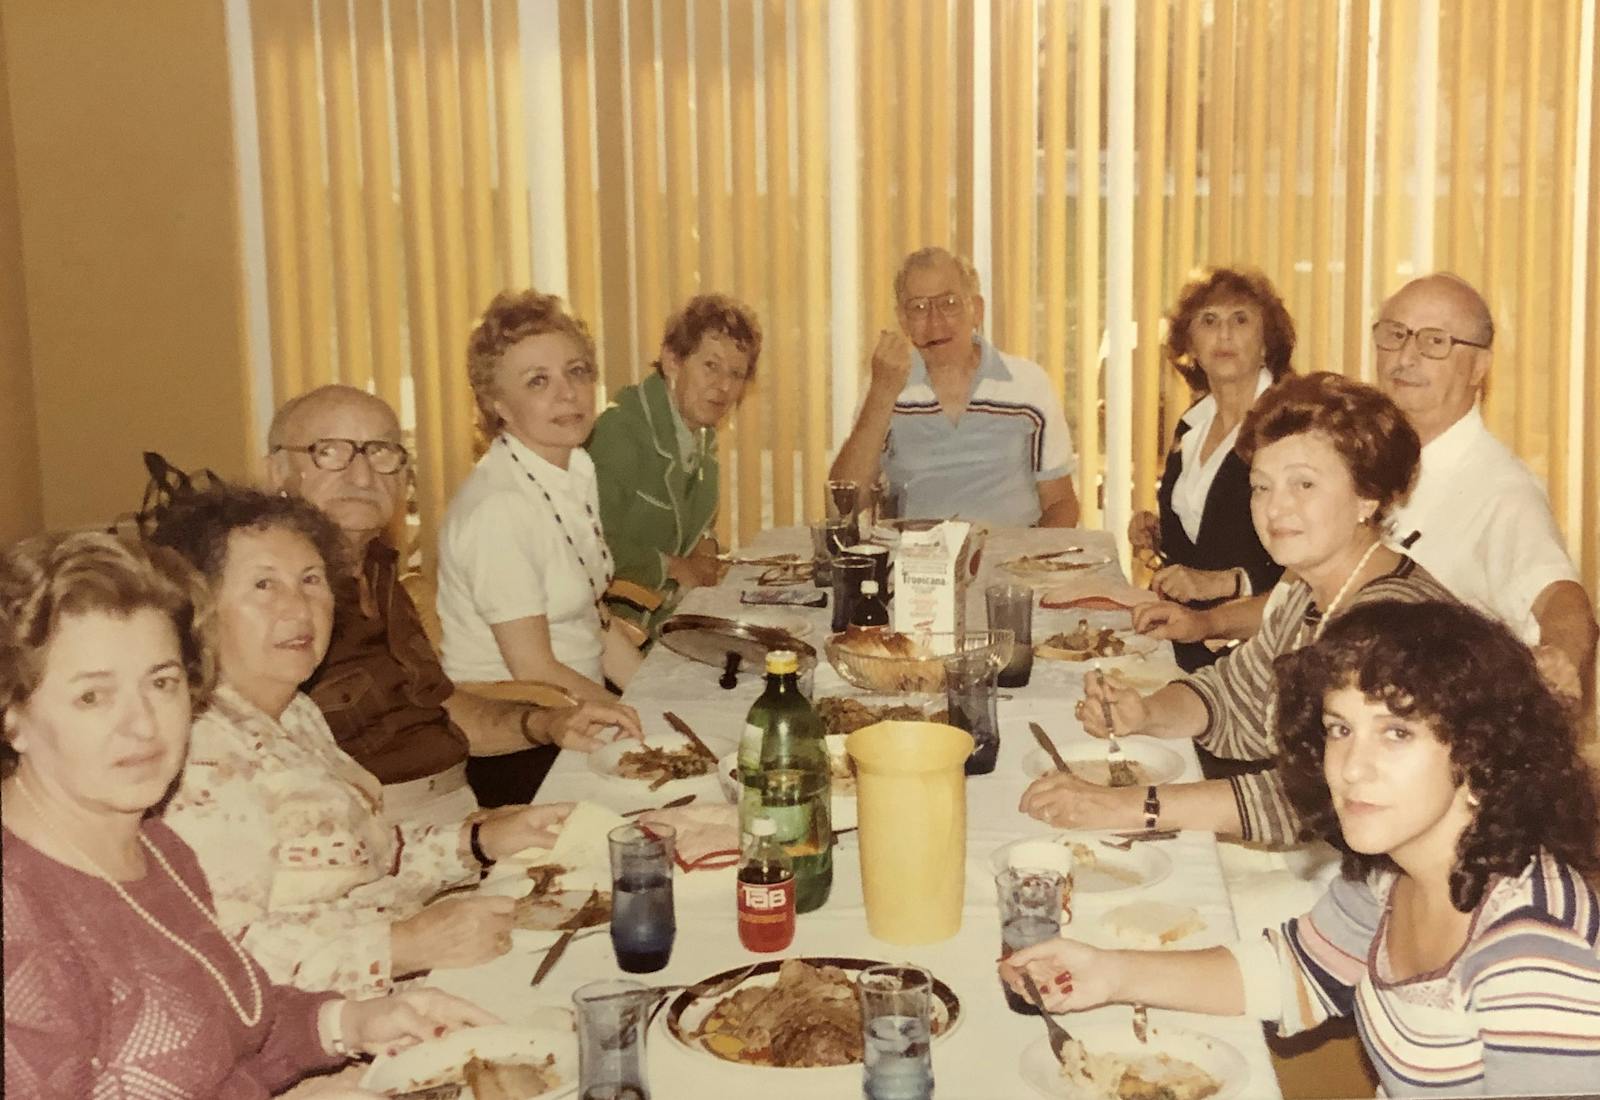 Genna's grandparents (second and third from left) with friends in 1984.